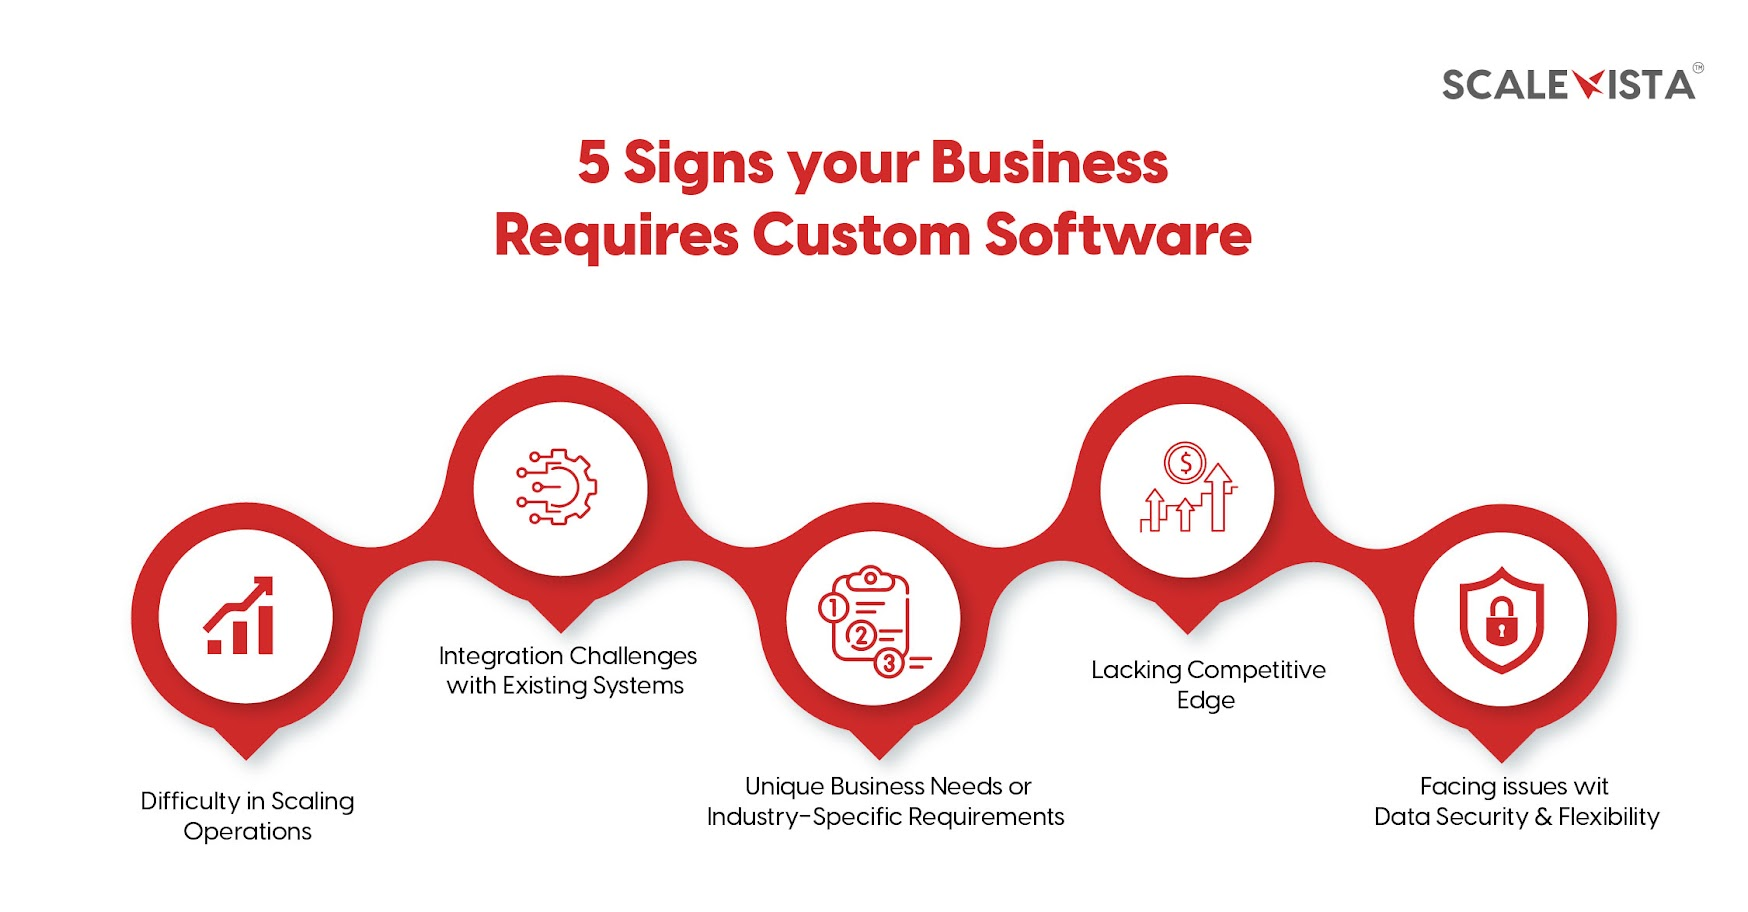 5 Signs your Business Requires Custom Software